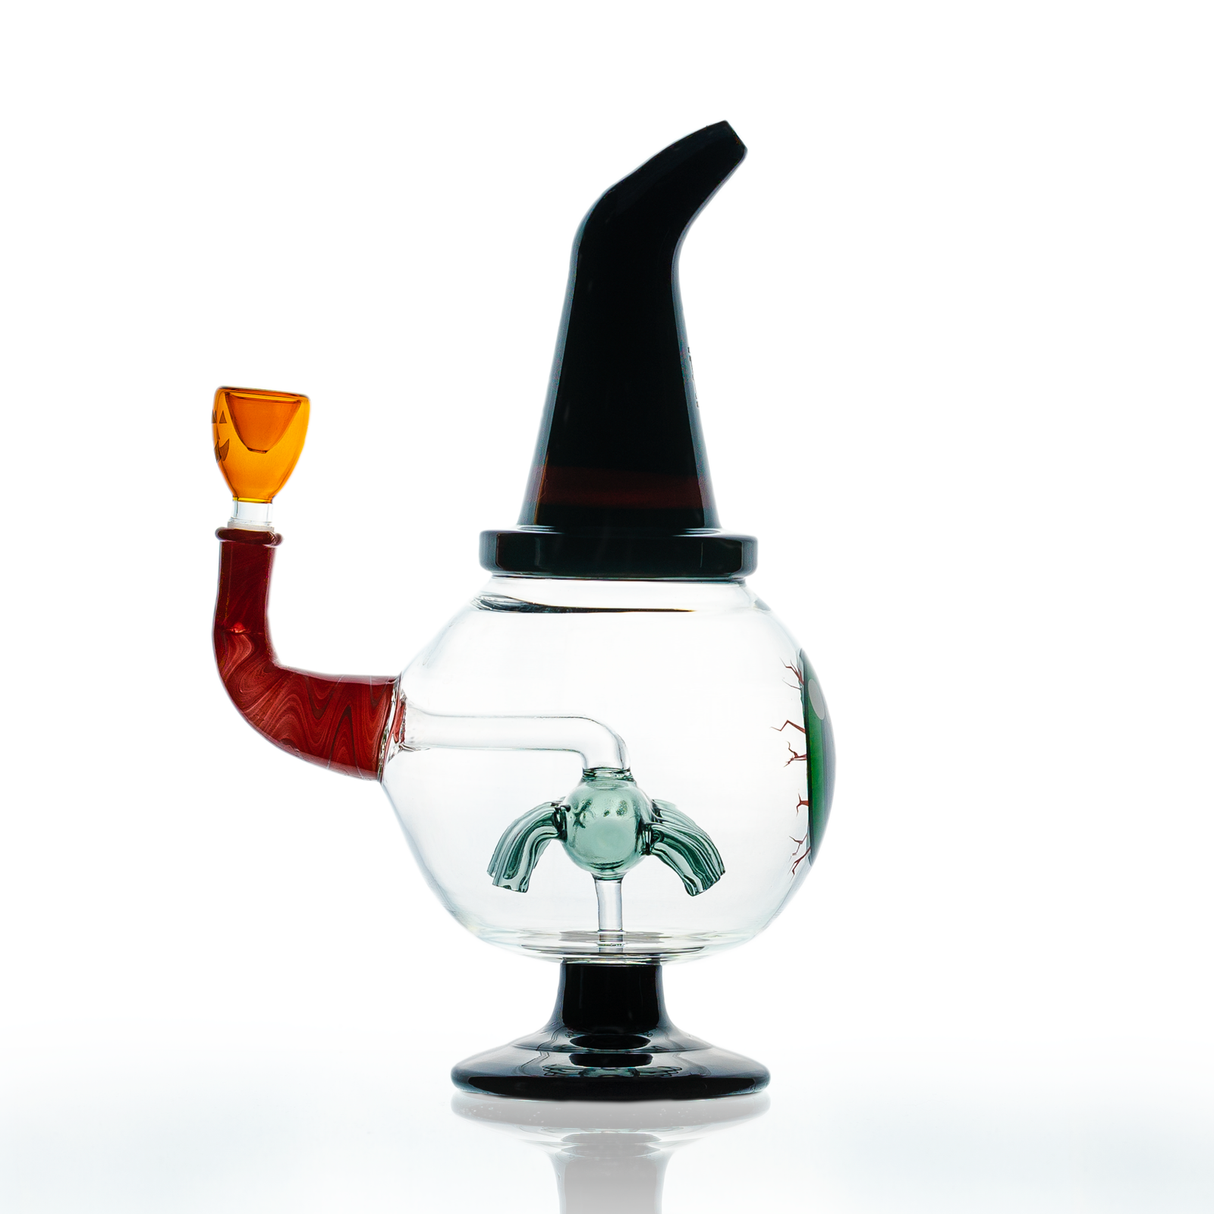 Hemper Wicked Witch XL Bong in orange, 10" tall, front view on white background